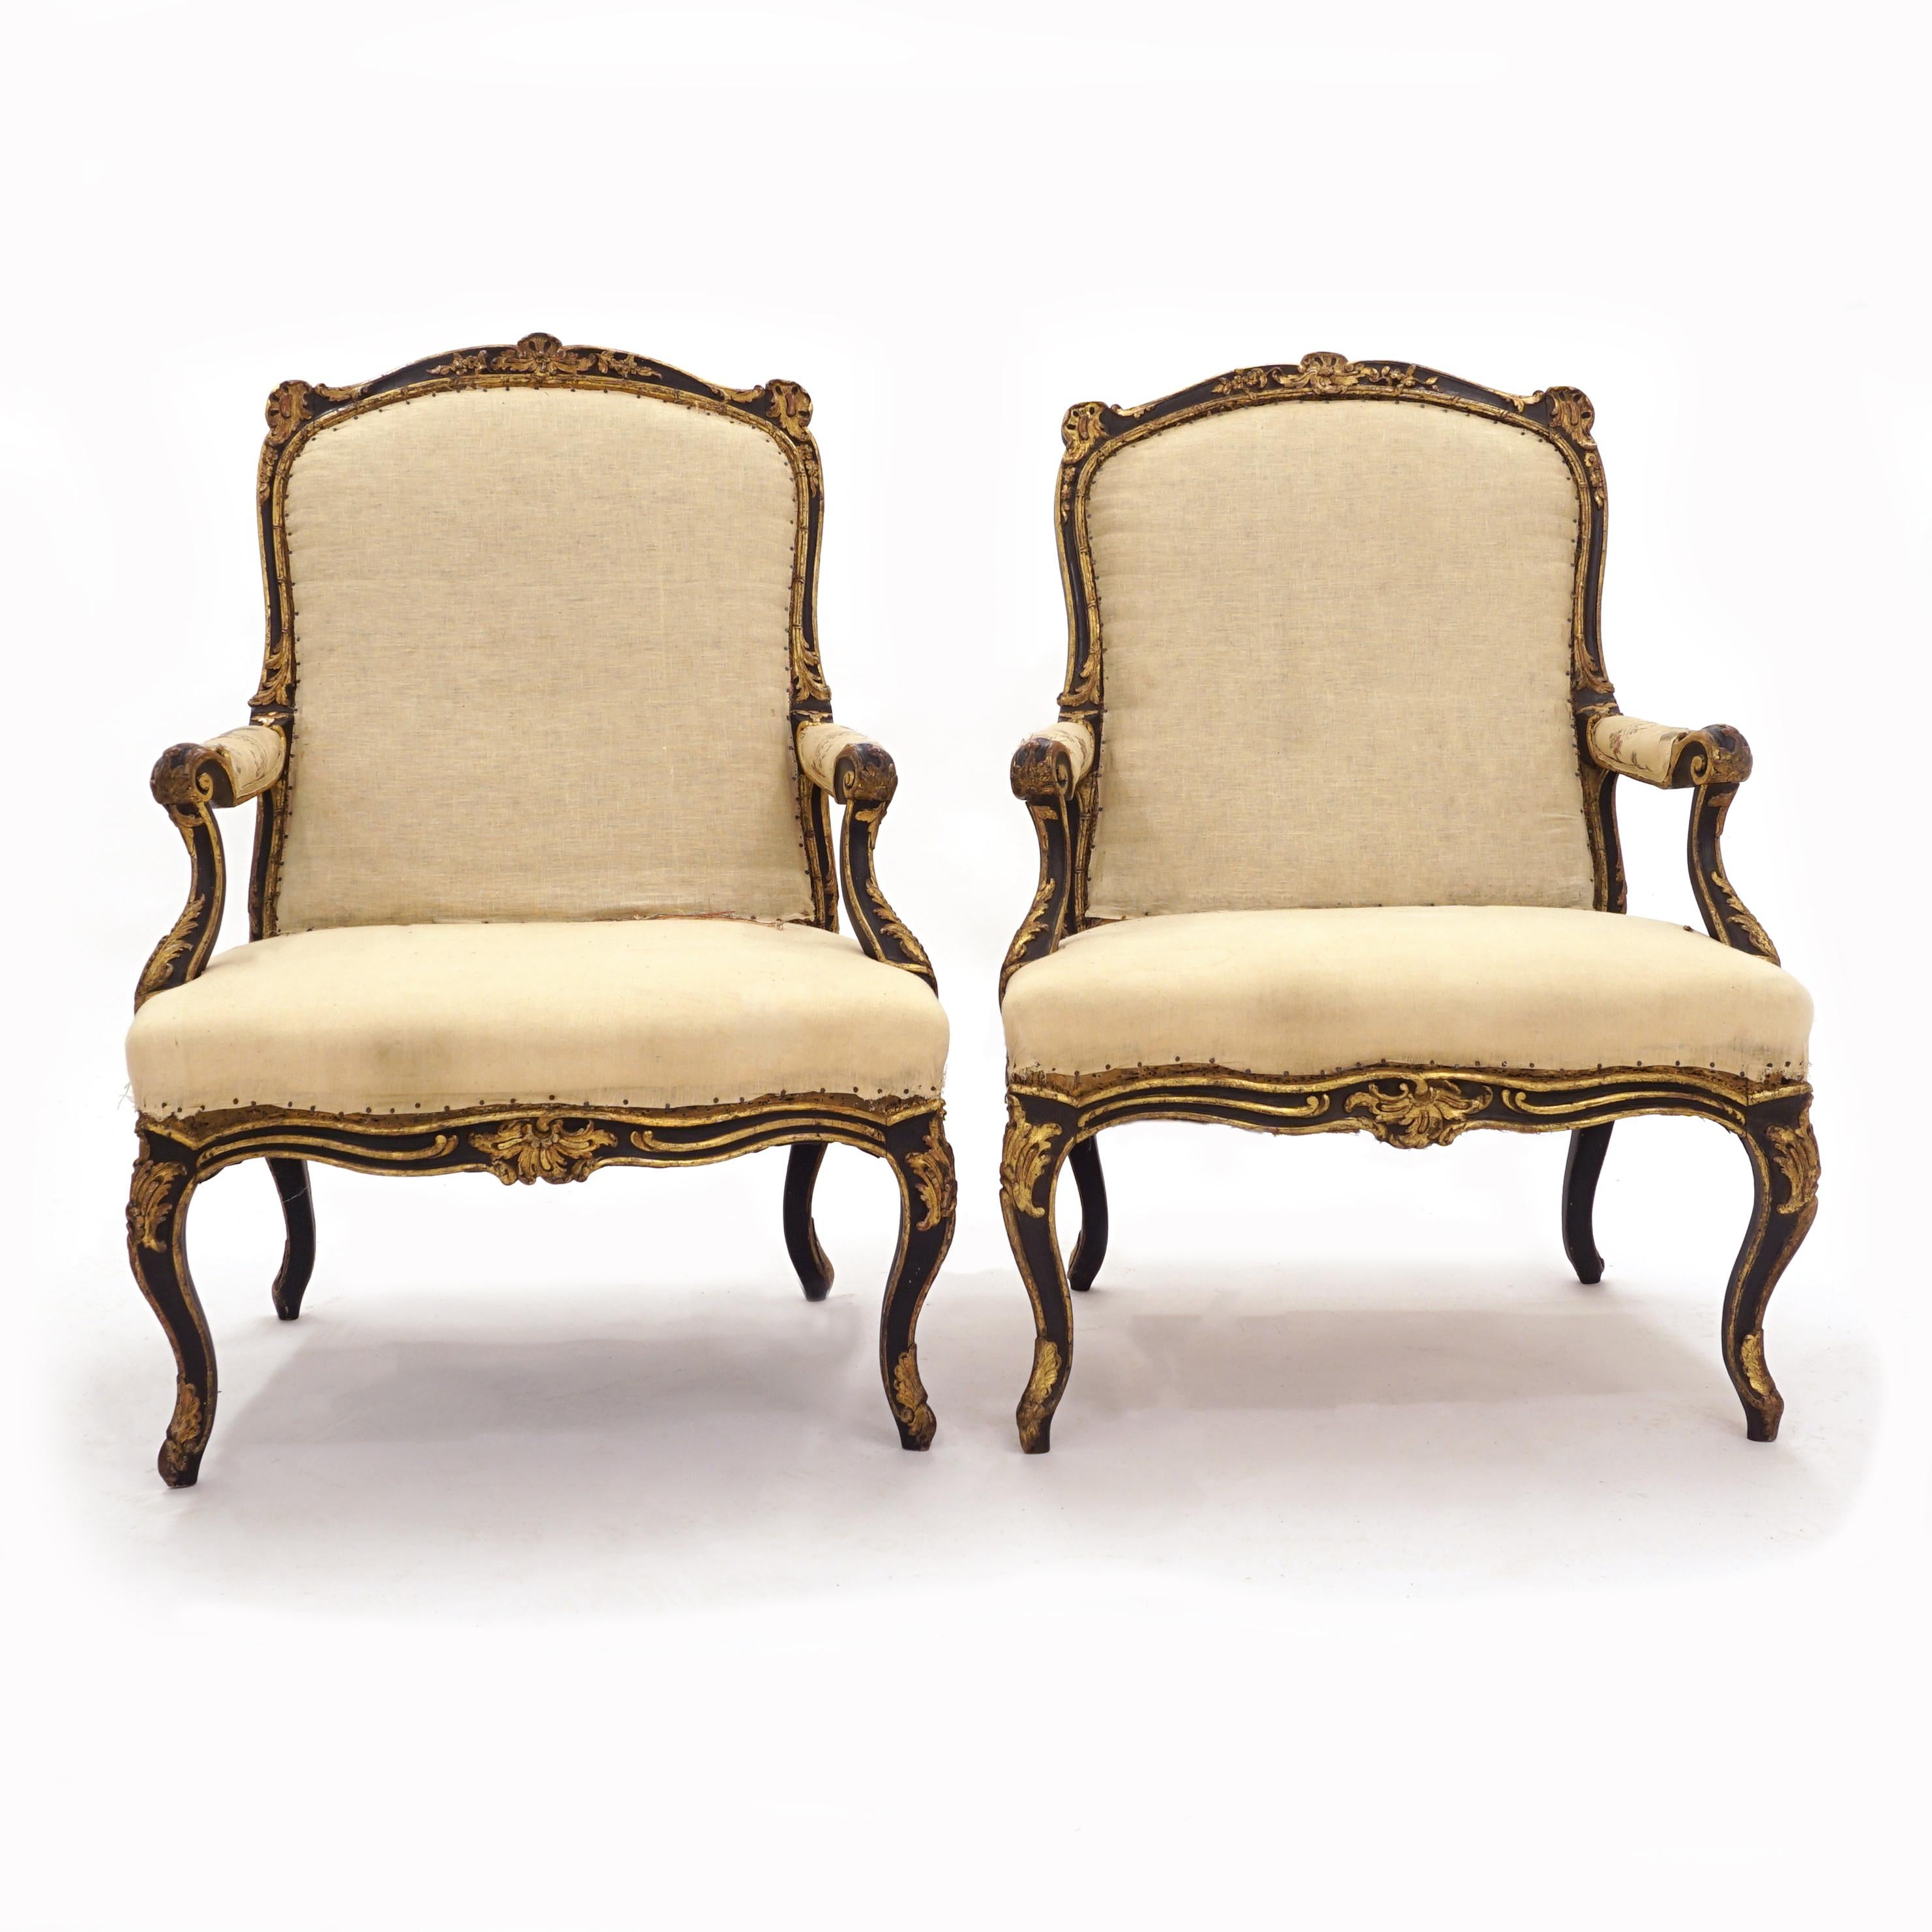 An impressive pair of French mid 18th century black and gilt pair of armchairs Fauteuil à la Reine
France circa 1755-60
The chairs need a new upholstery. Difference of circa 1cm in height.